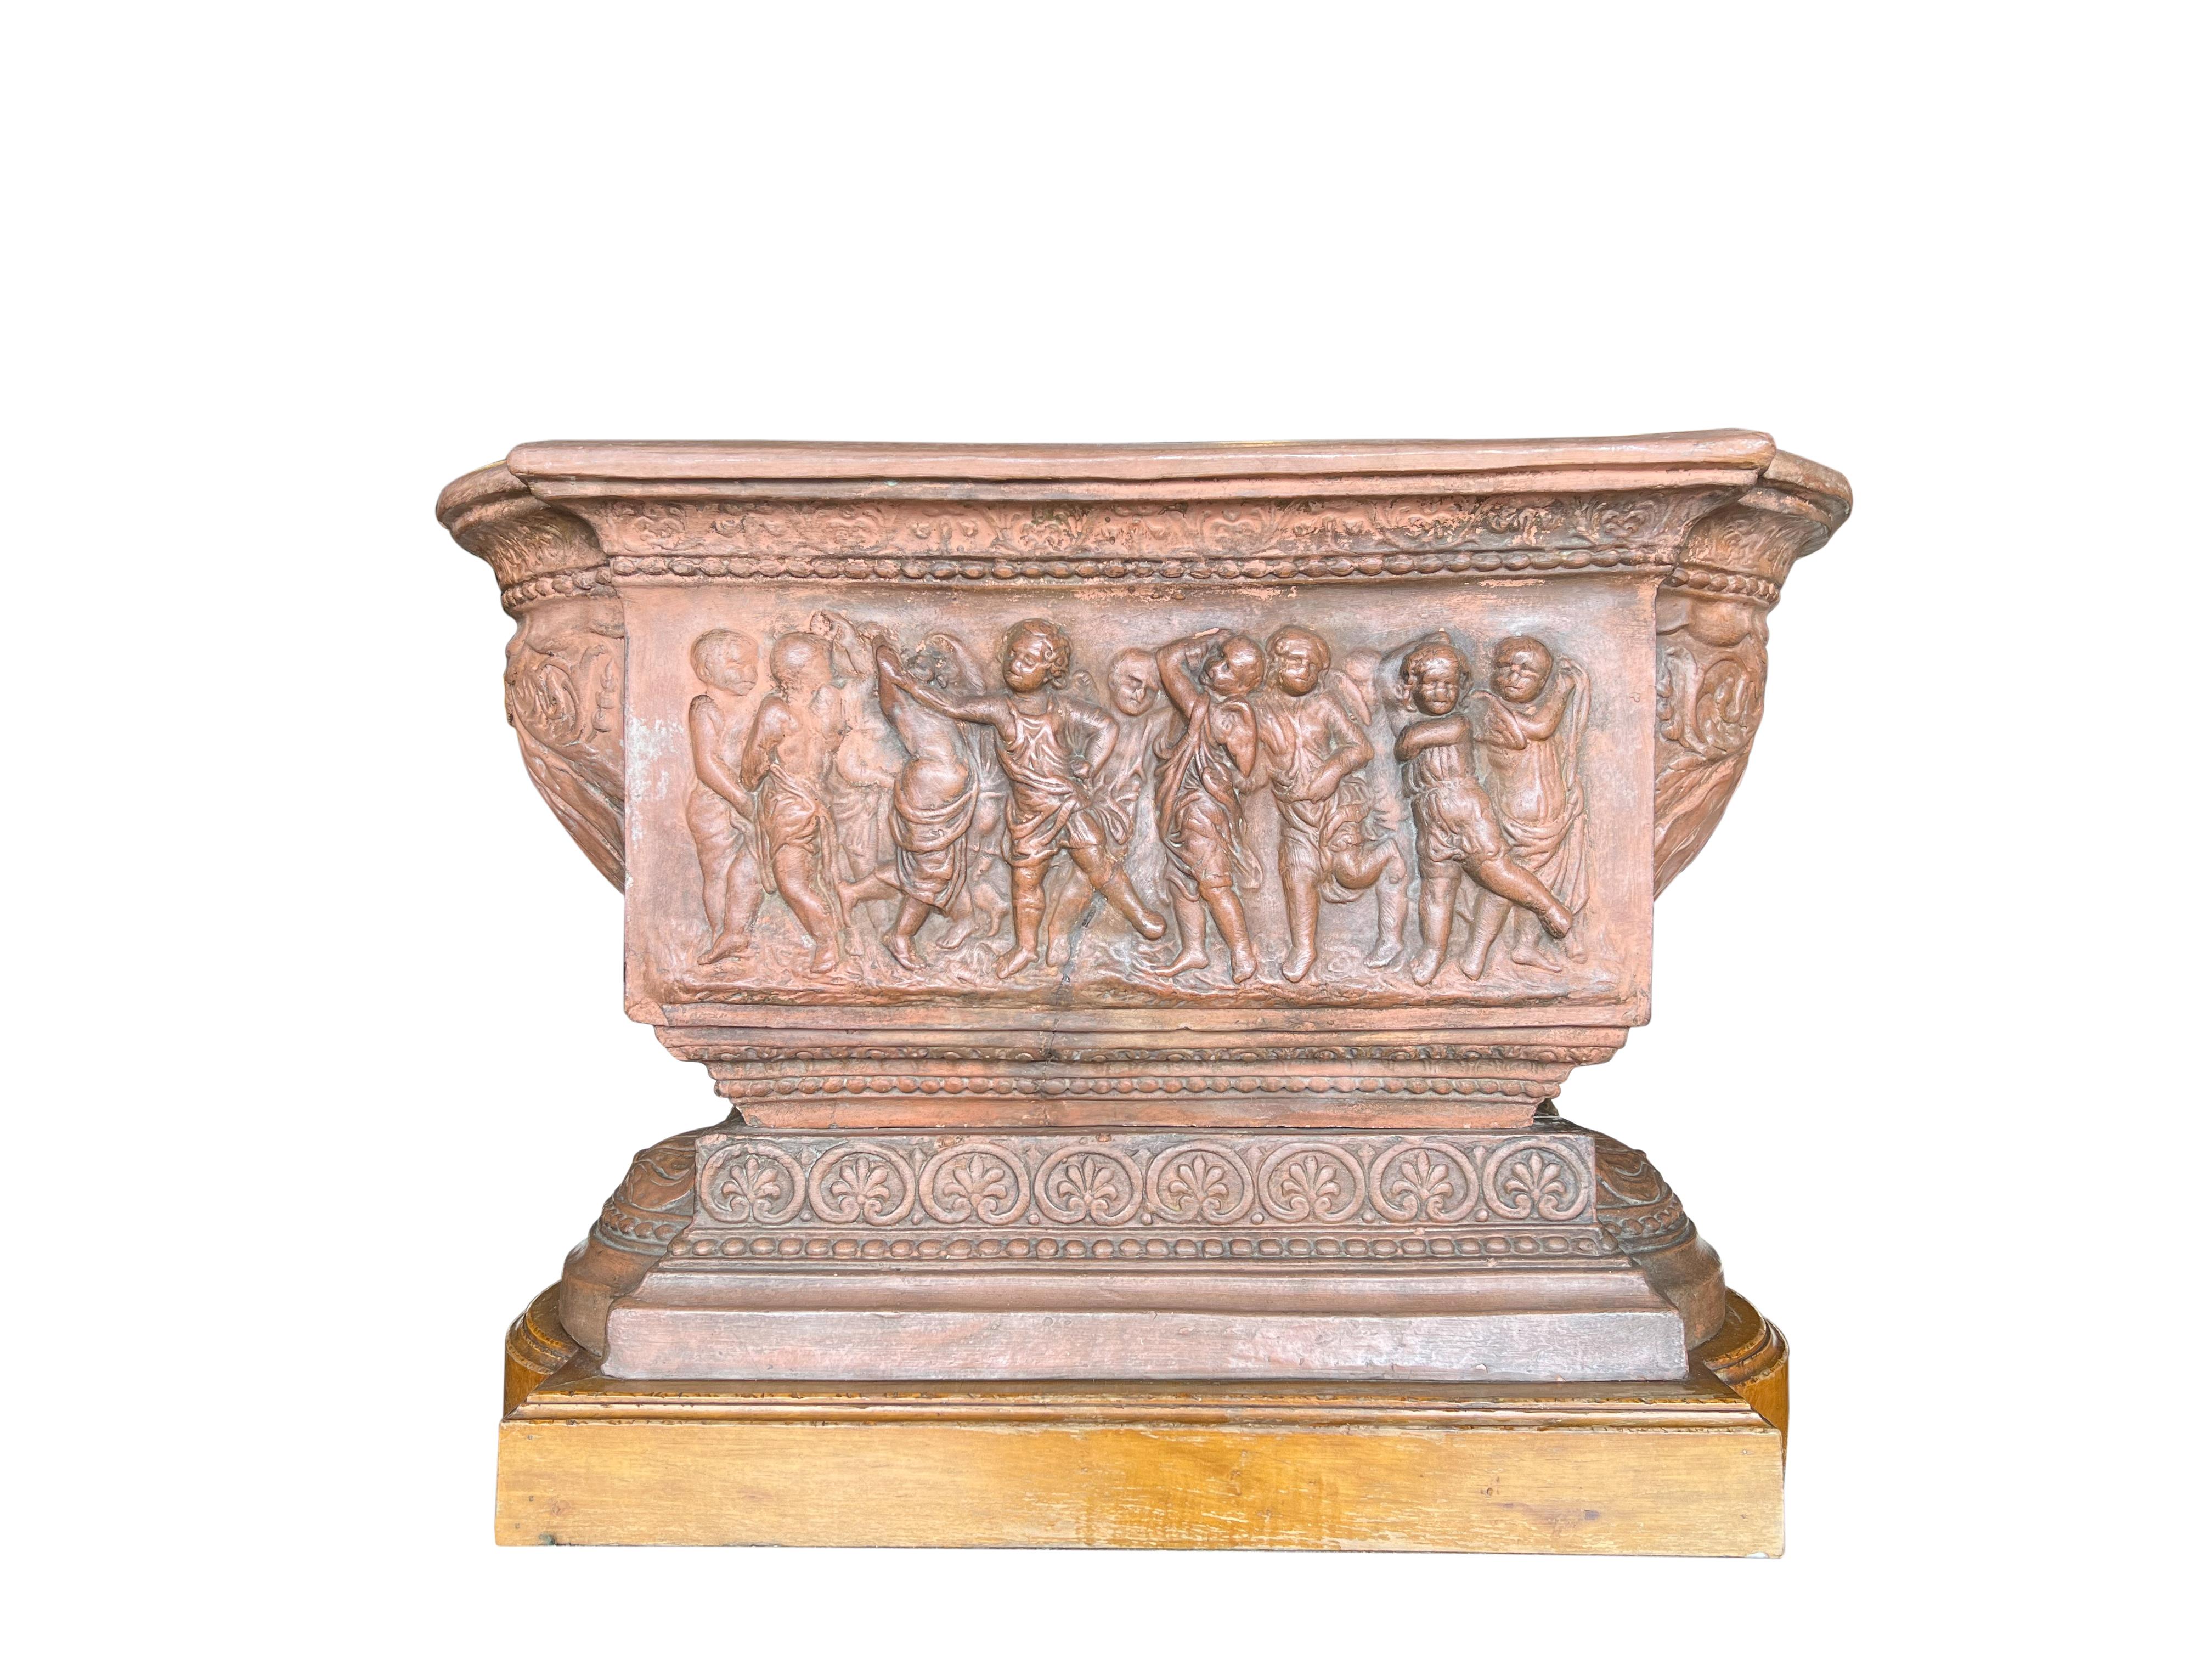 Terracotta planter centerpiece with dancing cherubs, Florence Circa 1820.

Centerpiece total measures: 27”L x 14.25”W x 18”H, including 2 pieces; the terracotta planter trough (27”L x 14.25”W x 11.25”H) which rests on the terracotta base (22”L x